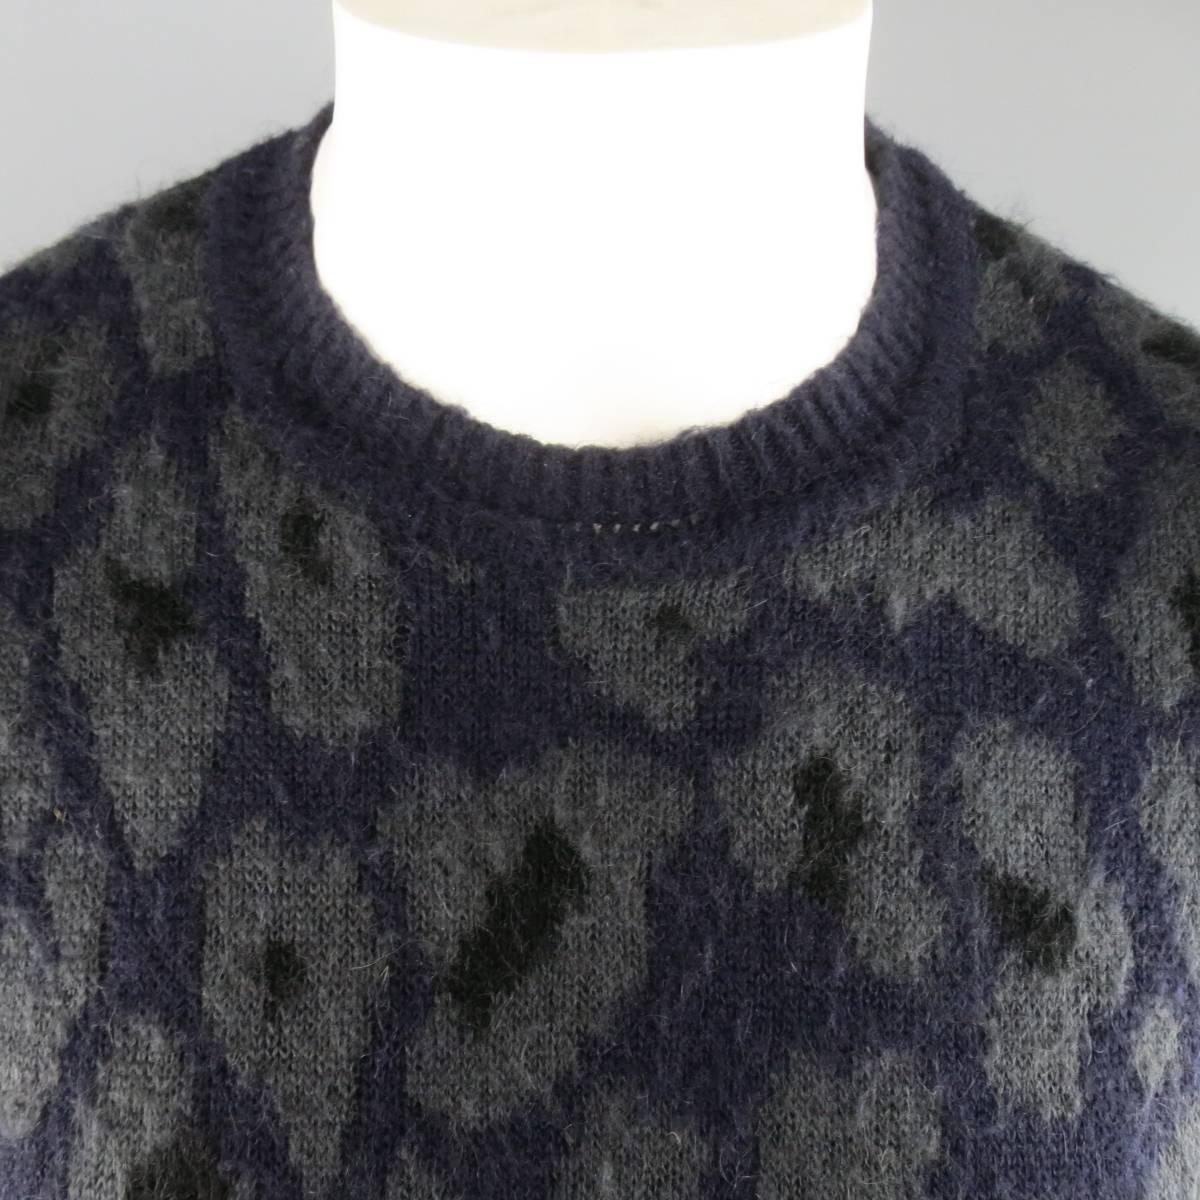 RAF SIMONS crewneck pullover sweater in a deep navy blue mohair blend fuzzy knit with all over charcoal cheetah leopard print. Wear throughout. Made in Italy.
 
Good Pre-Owned Condition.
Marked: S
 
Measurements:
 
Shoulder: 16.5 in.
Chest: 40